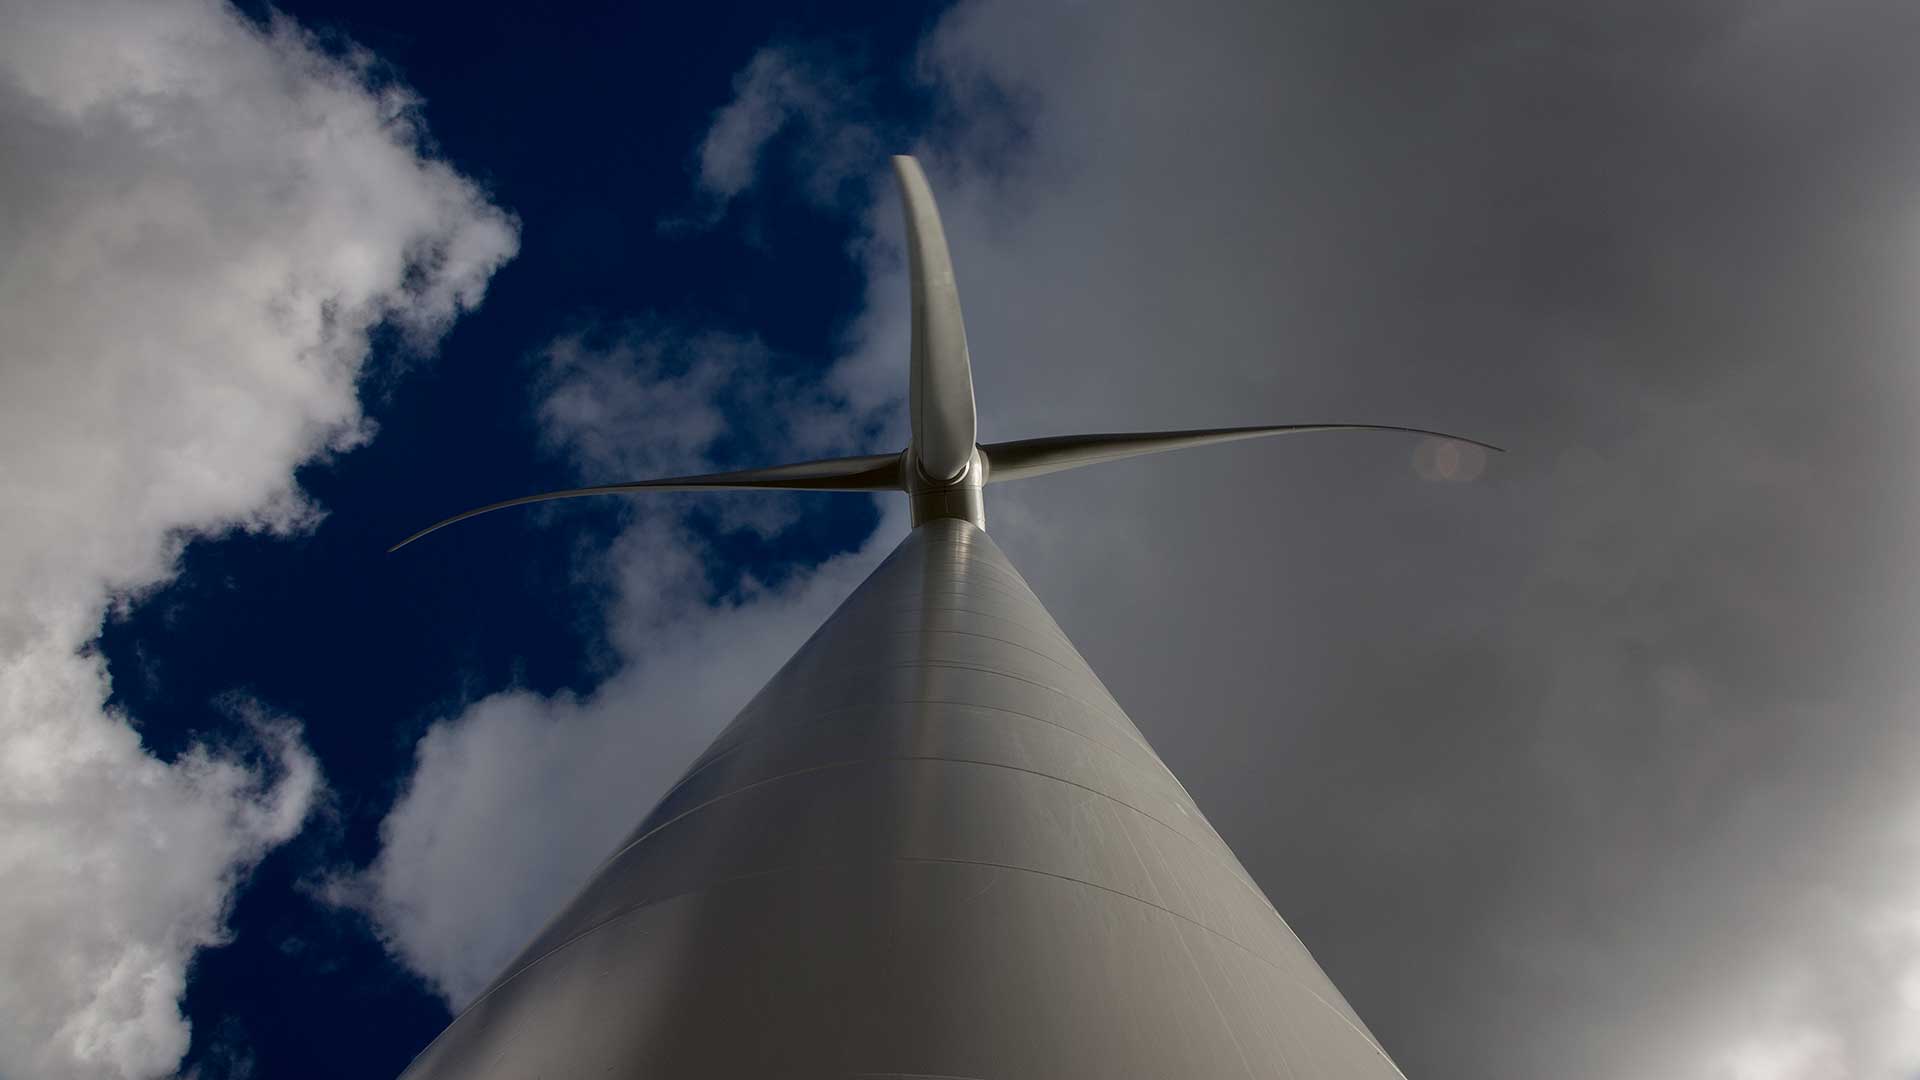 Østerild Wind Turbine Test Field is a facility managed by the DTU Risø Campus of the Technical University of Denmark for testing of offshore wind turbines with a pinnacle height up to 330 metres near Thisted-Østerild, Denmark.